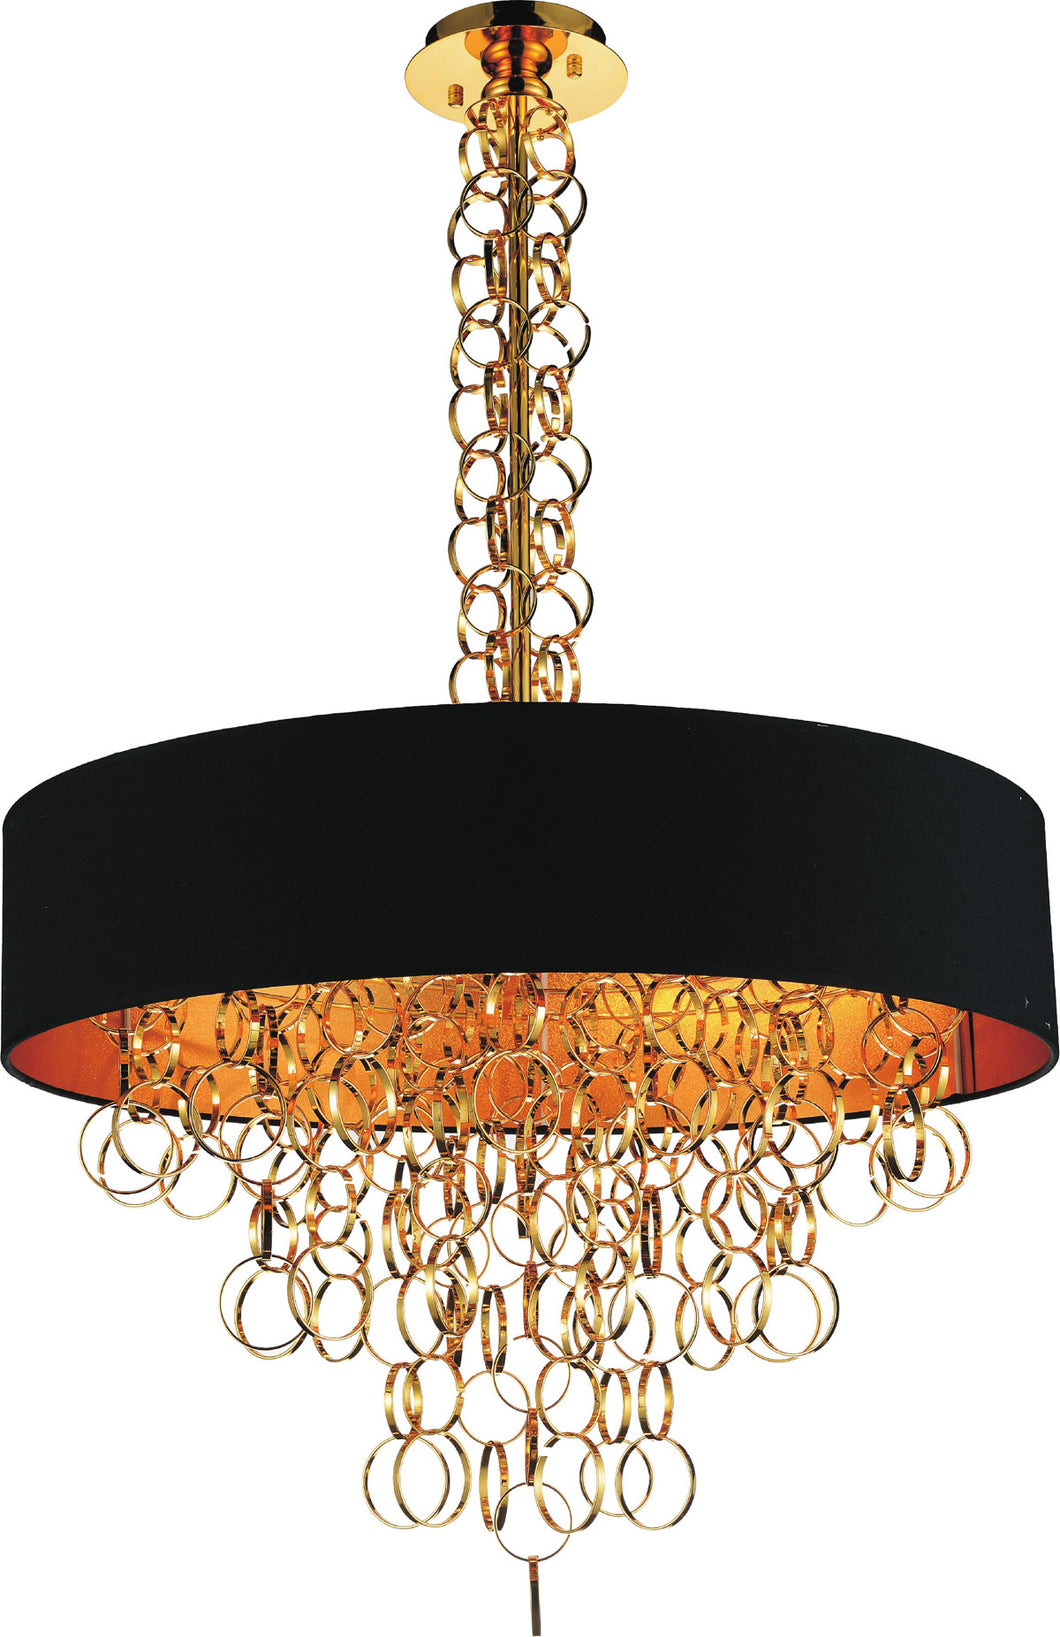 8 Light Drum Shade Chandelier with Gold finish